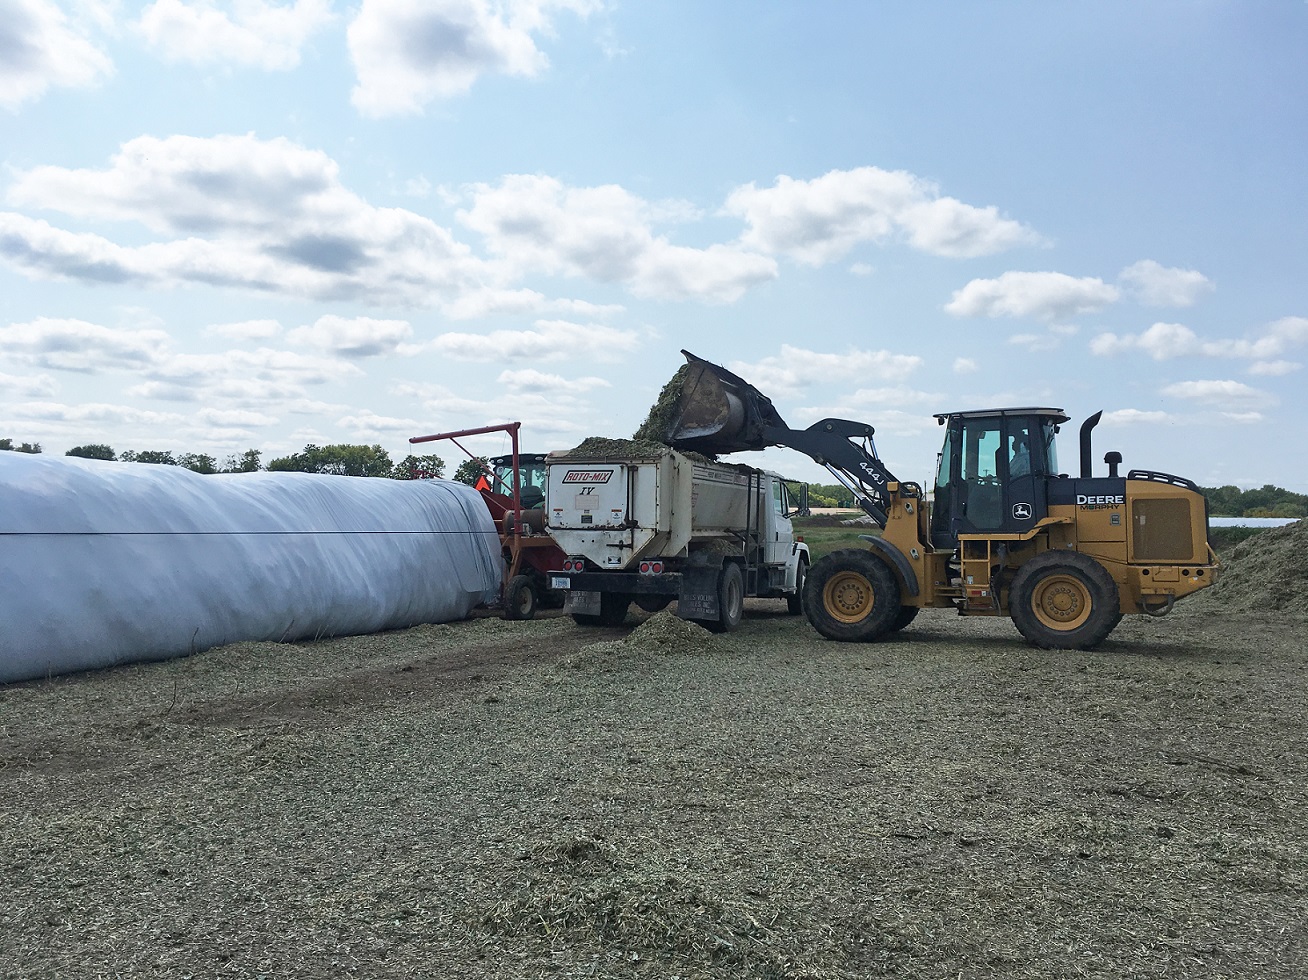 Discover more than 66 silage bags - esthdonghoadian